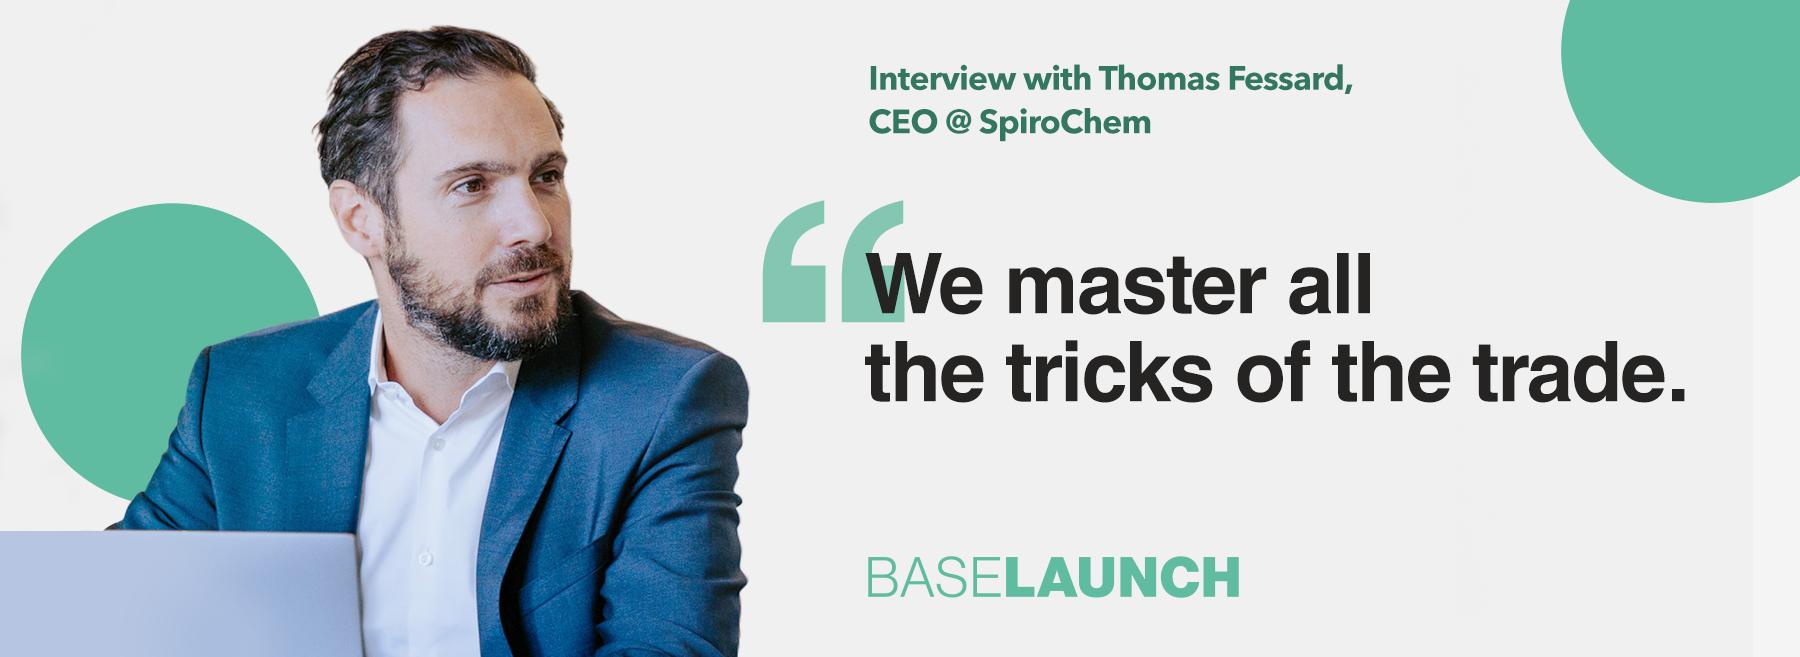 Chemistry for breakfast, lunch, and dinner… Interview with Thomas Fessard, SpiroChem’s CEO